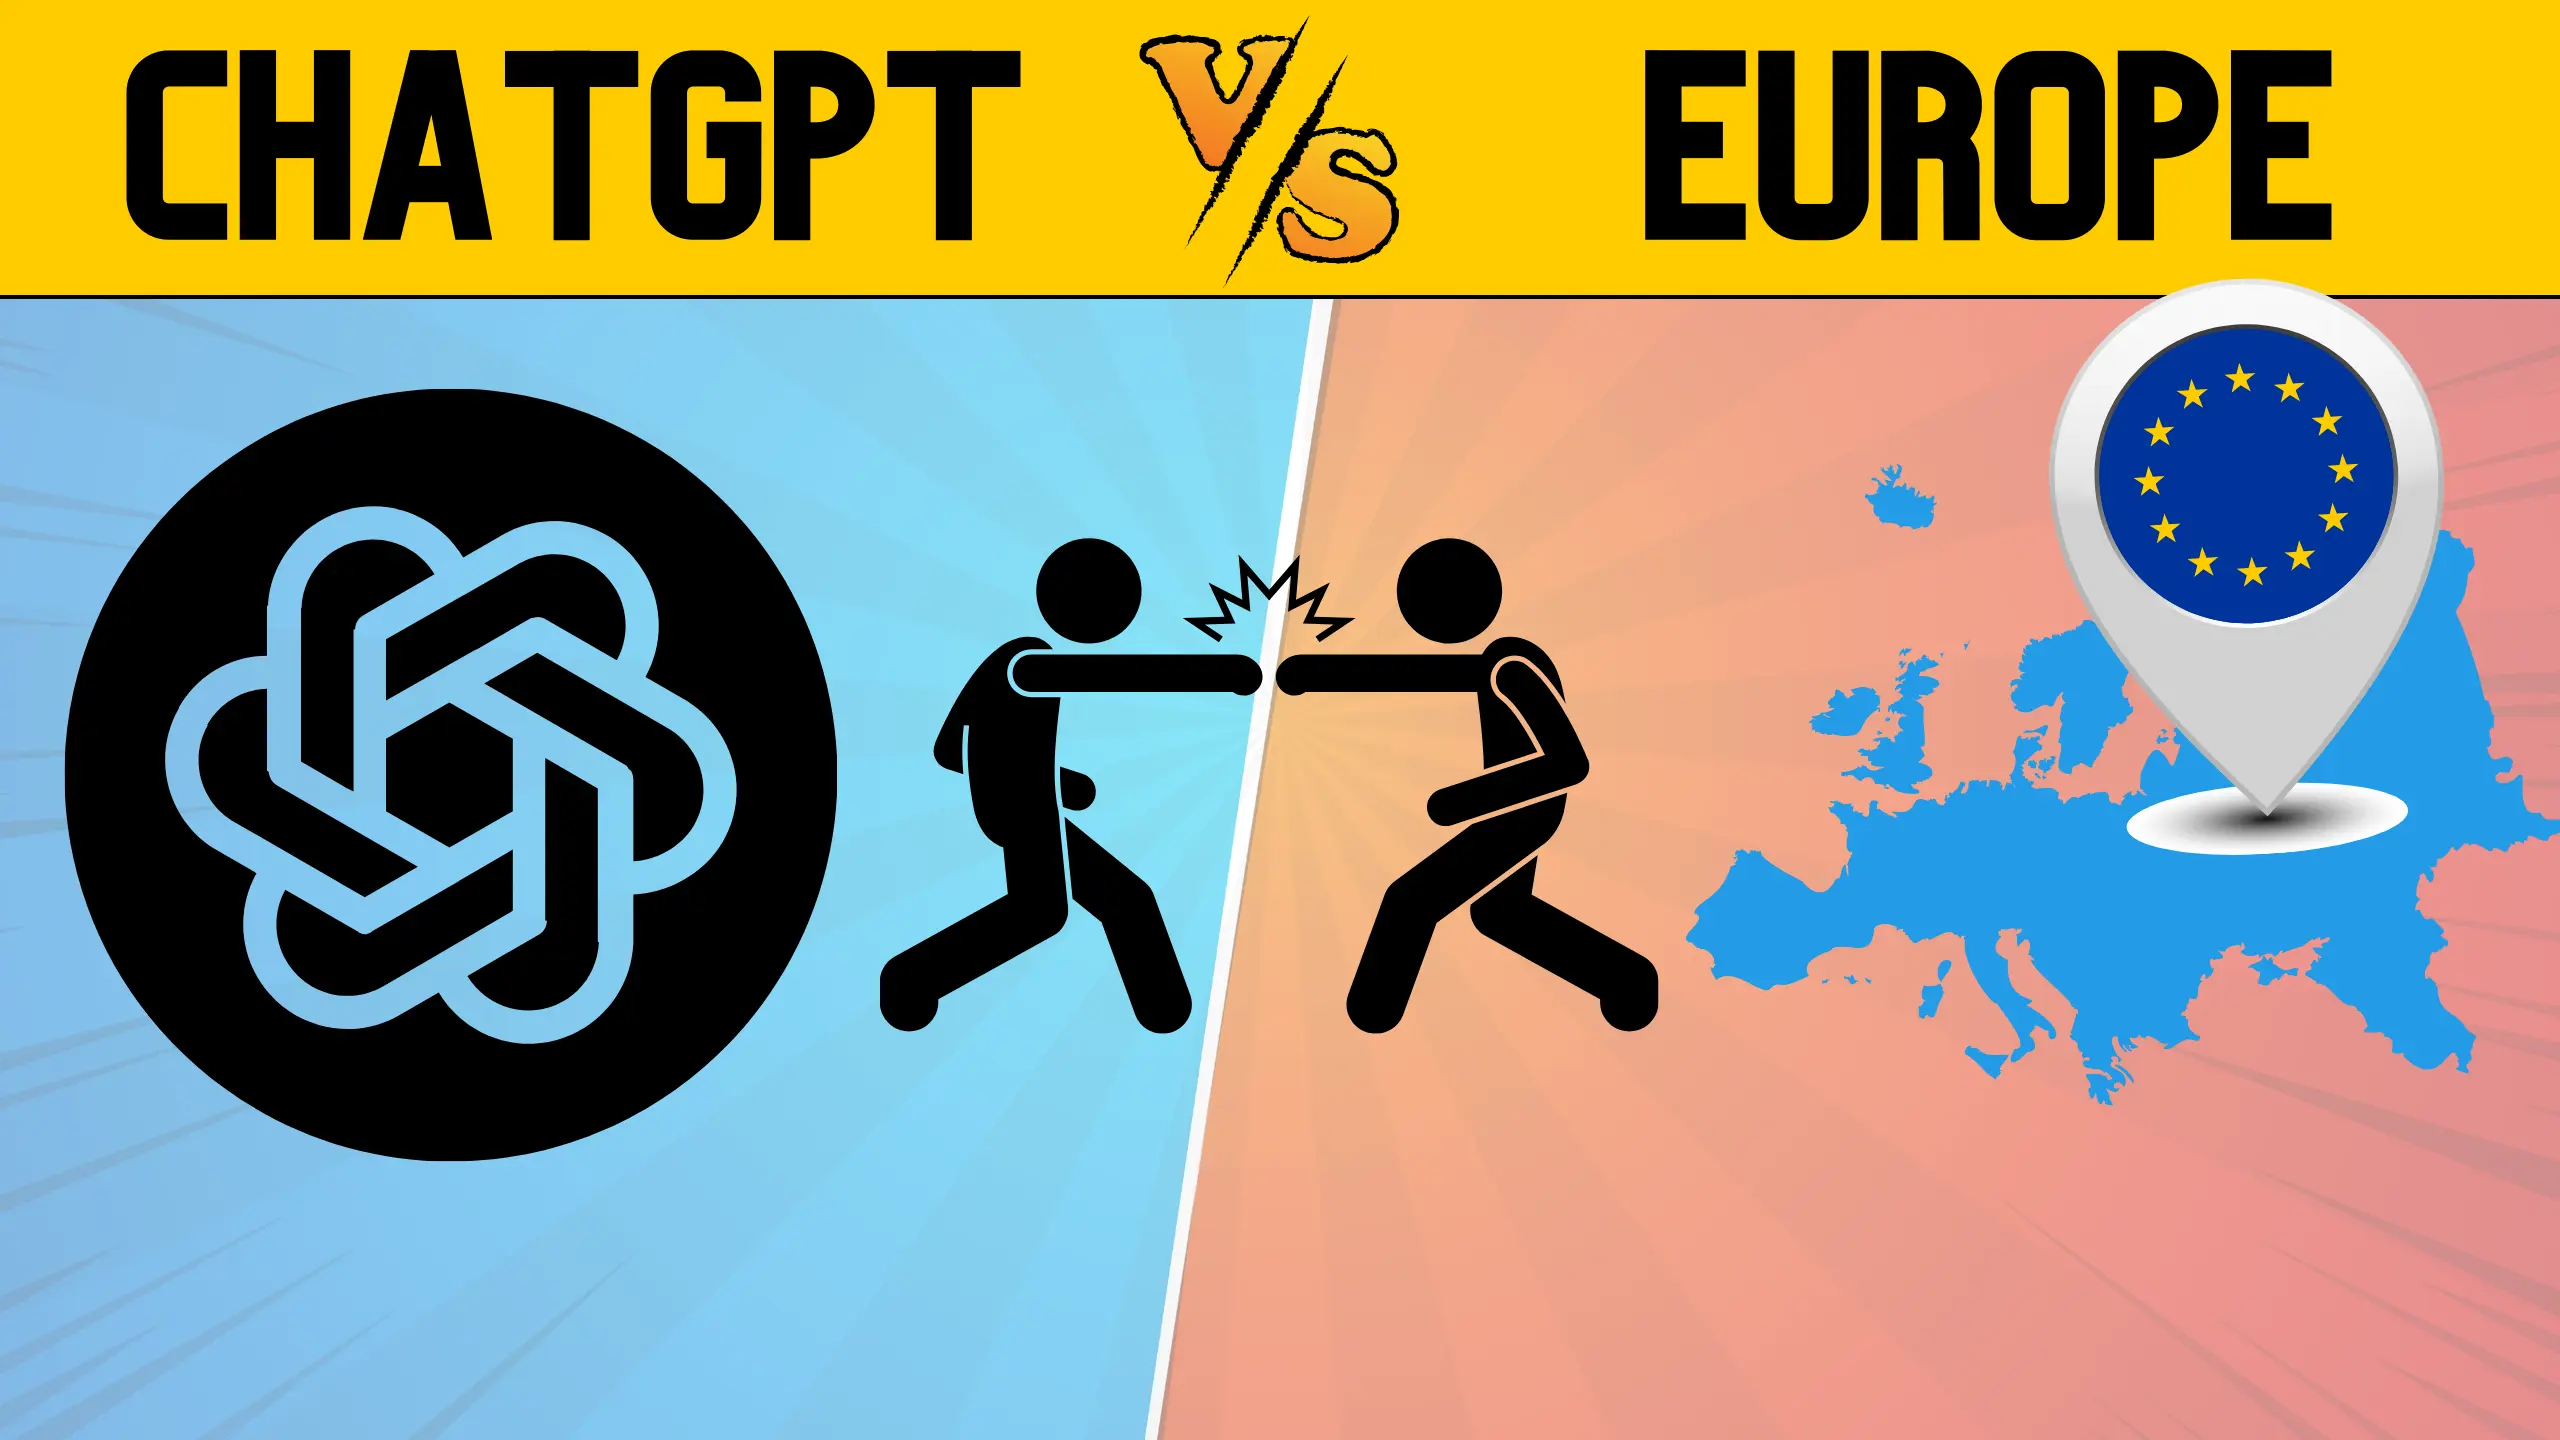 ChatGPT violates Europe's privacy